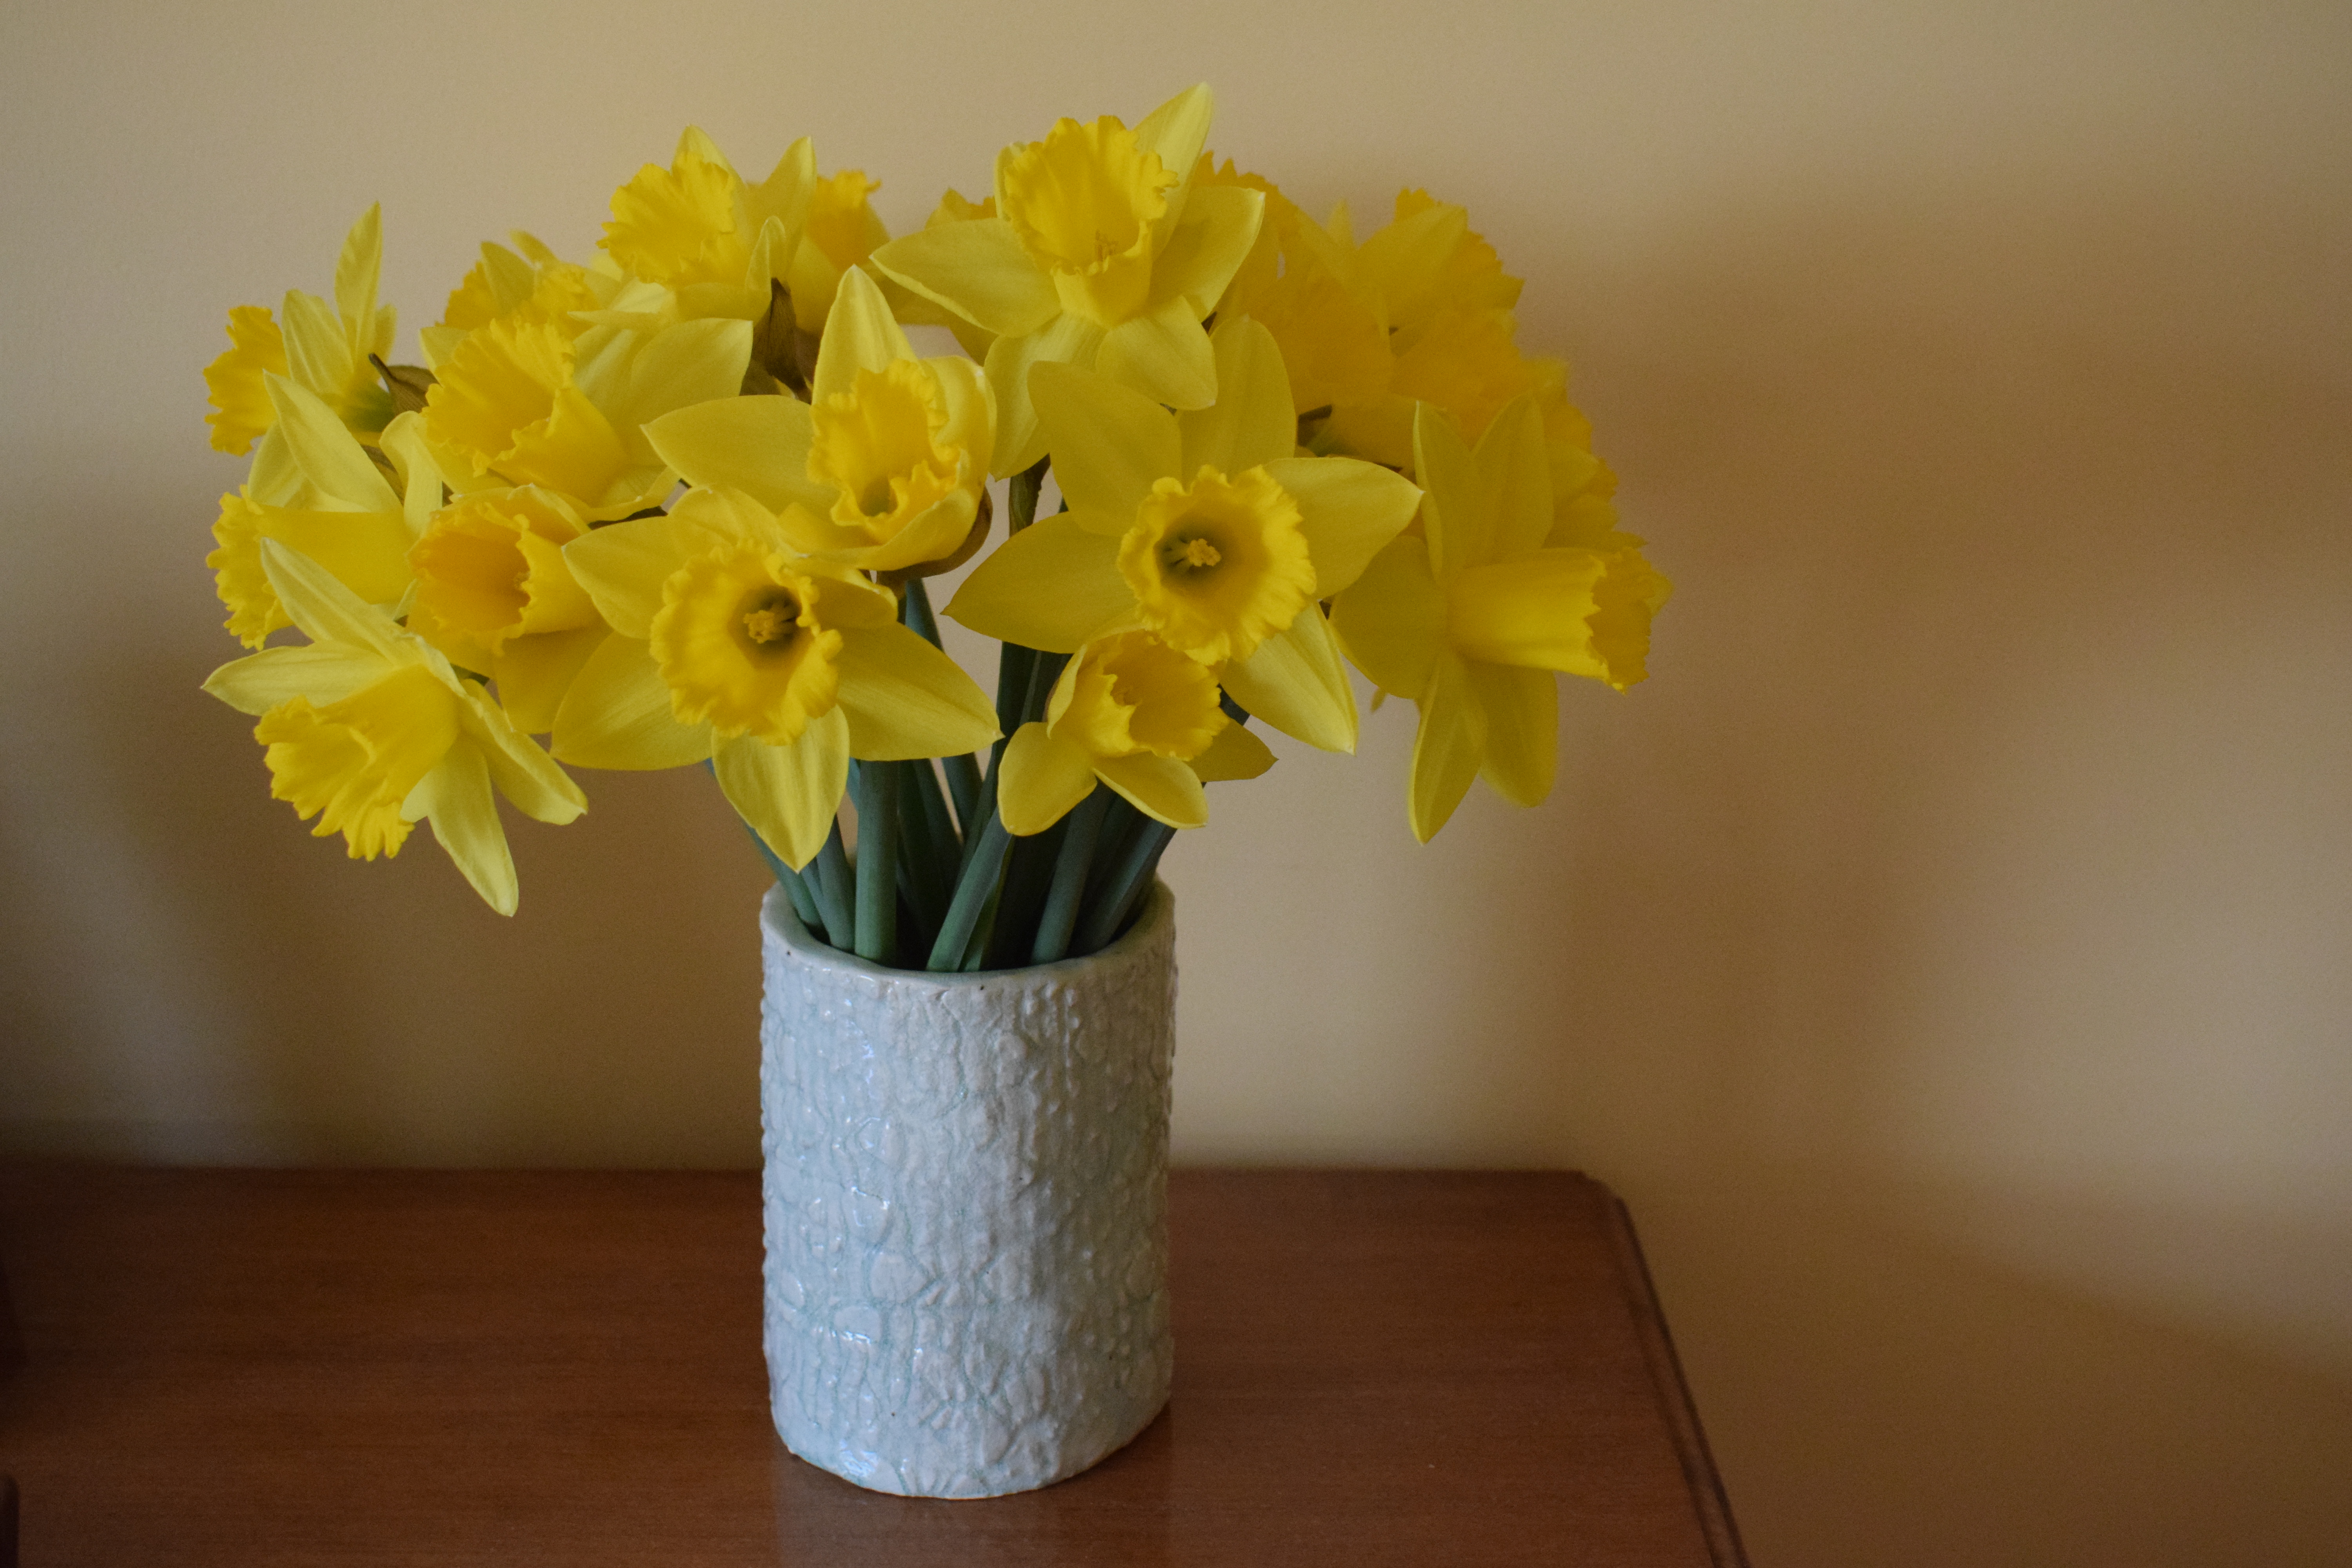 Daffodils, It's the weekend number 43